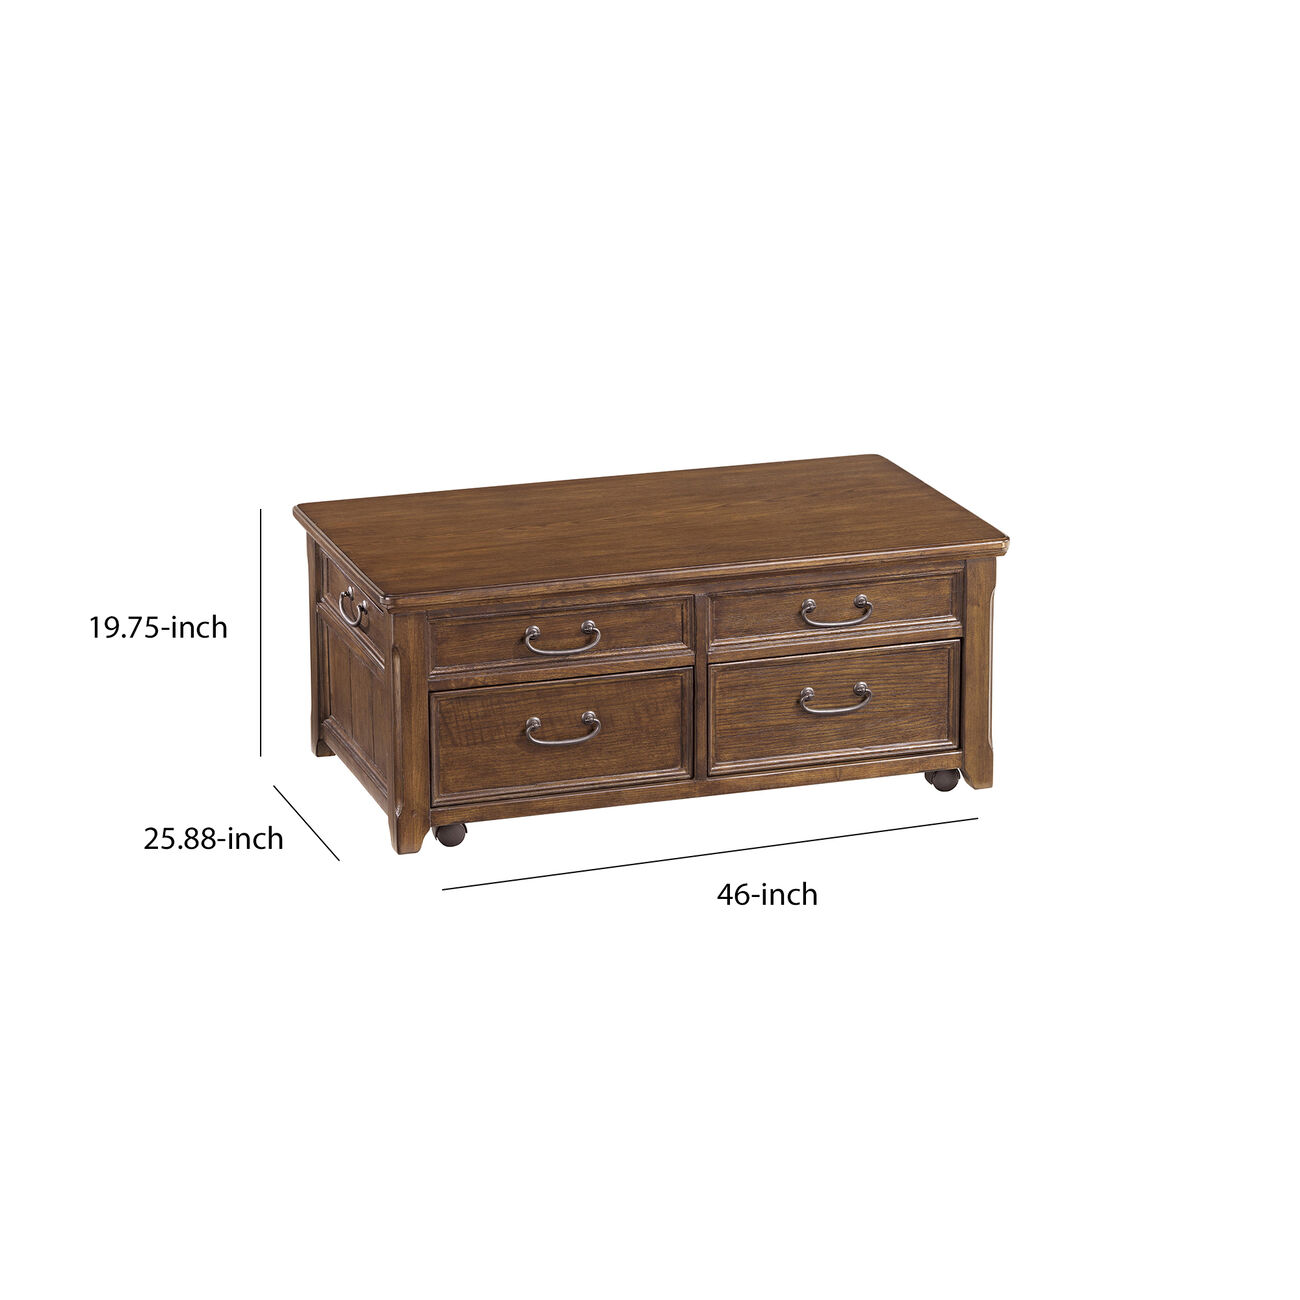 Wooden Lift Top Cocktail Table with 4 Drawers and Casters, Brown